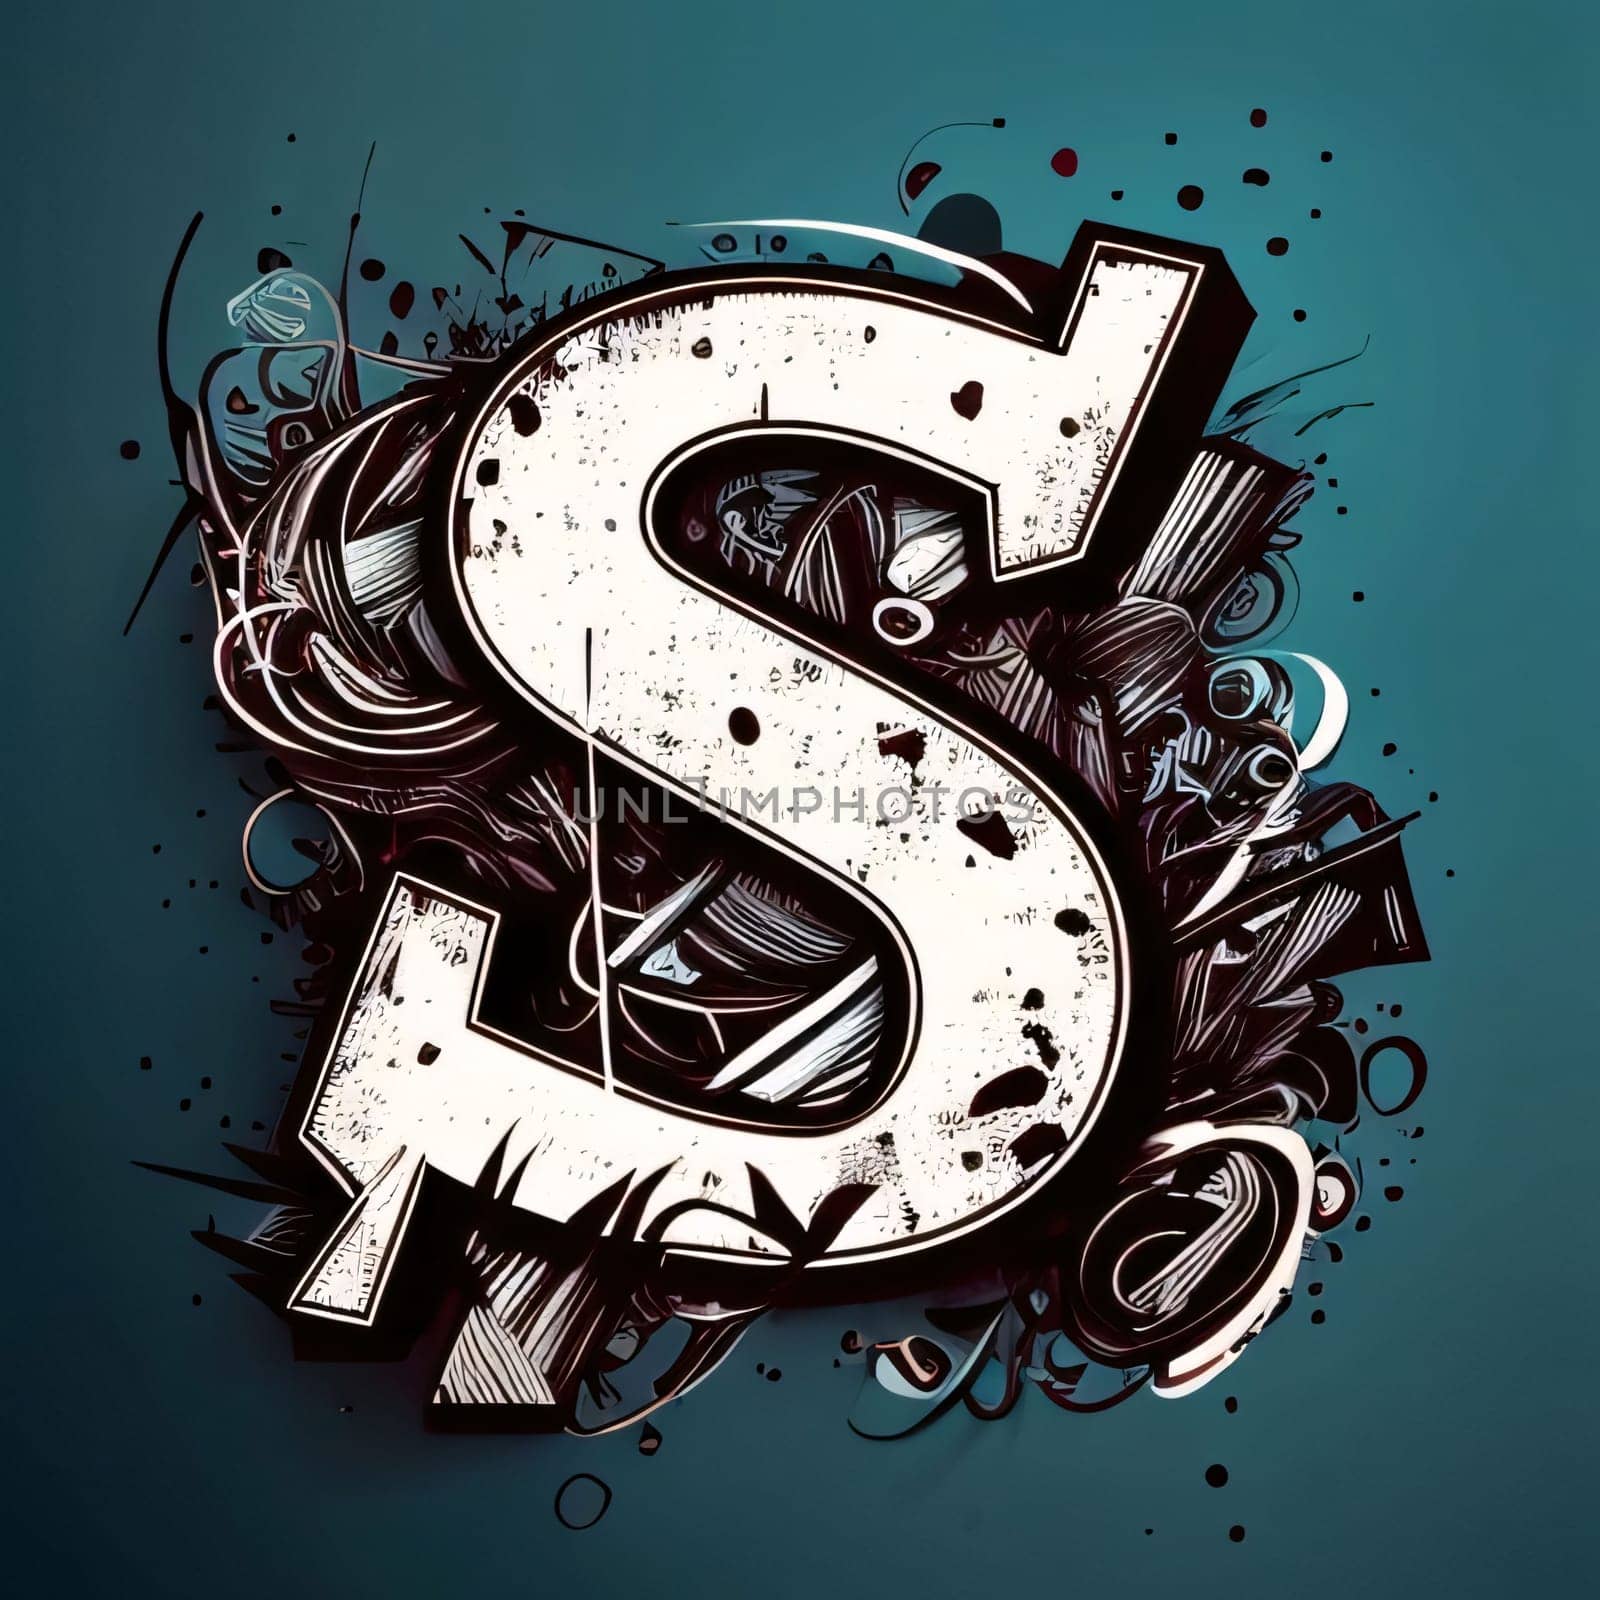 Graphic alphabet letters: Dollar sign illustration in graffiti style with urban elements. Ideal for printing onto fabric and paper or decoration.